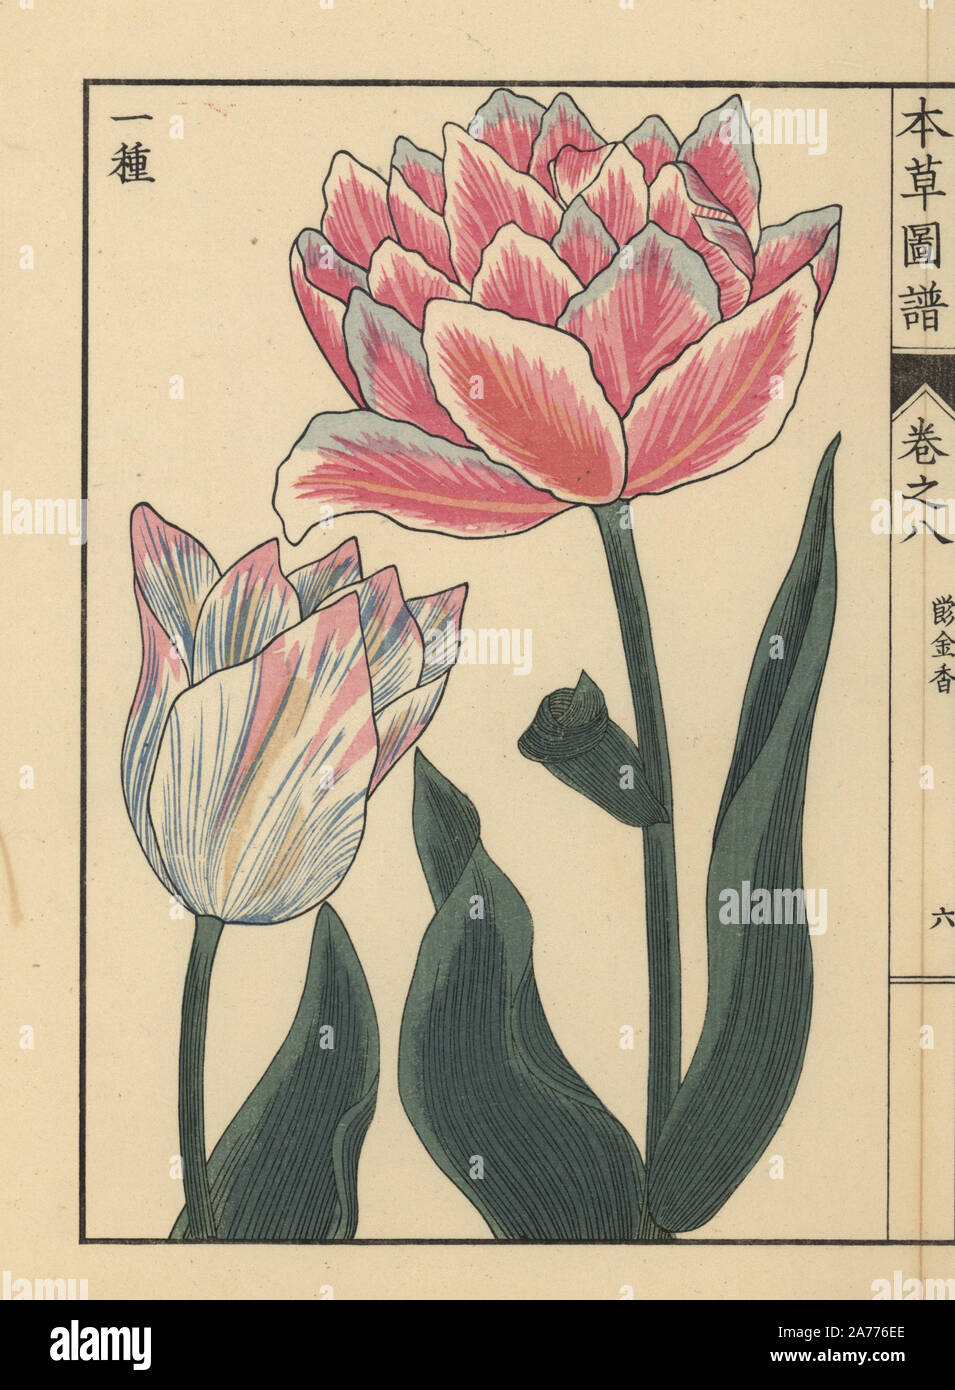 Tulip, Tulipa gesneria L. flore pleno. Colour-printed woodblock engraving by Kan'en Iwasaki from 'Honzo Zufu,' an Illustrated Guide to Medicinal Plants, Japan, 1884. Iwasaki (1786-1842) was a Japanese botanist, entomologist and zoologist. He was one of the first Japanese botanists to incorporate western knowledge into his studies. Stock Photo